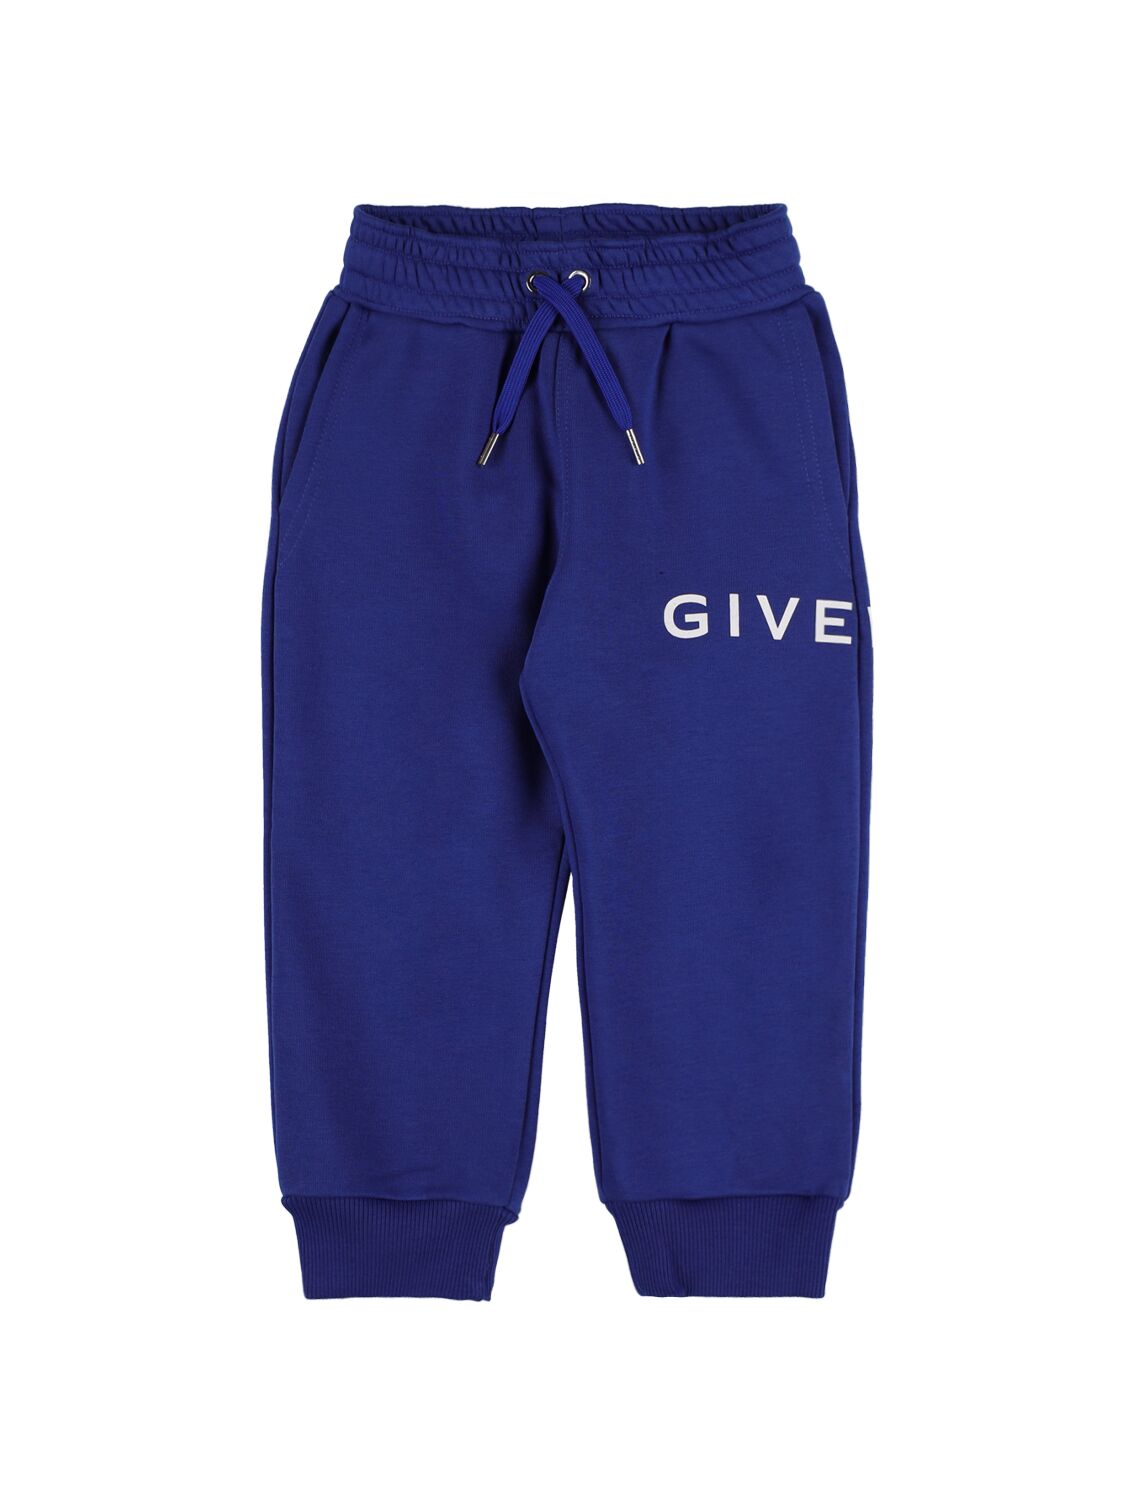 Givenchy Logo Printed Cotton Blend Sweatpants In Royal Blue